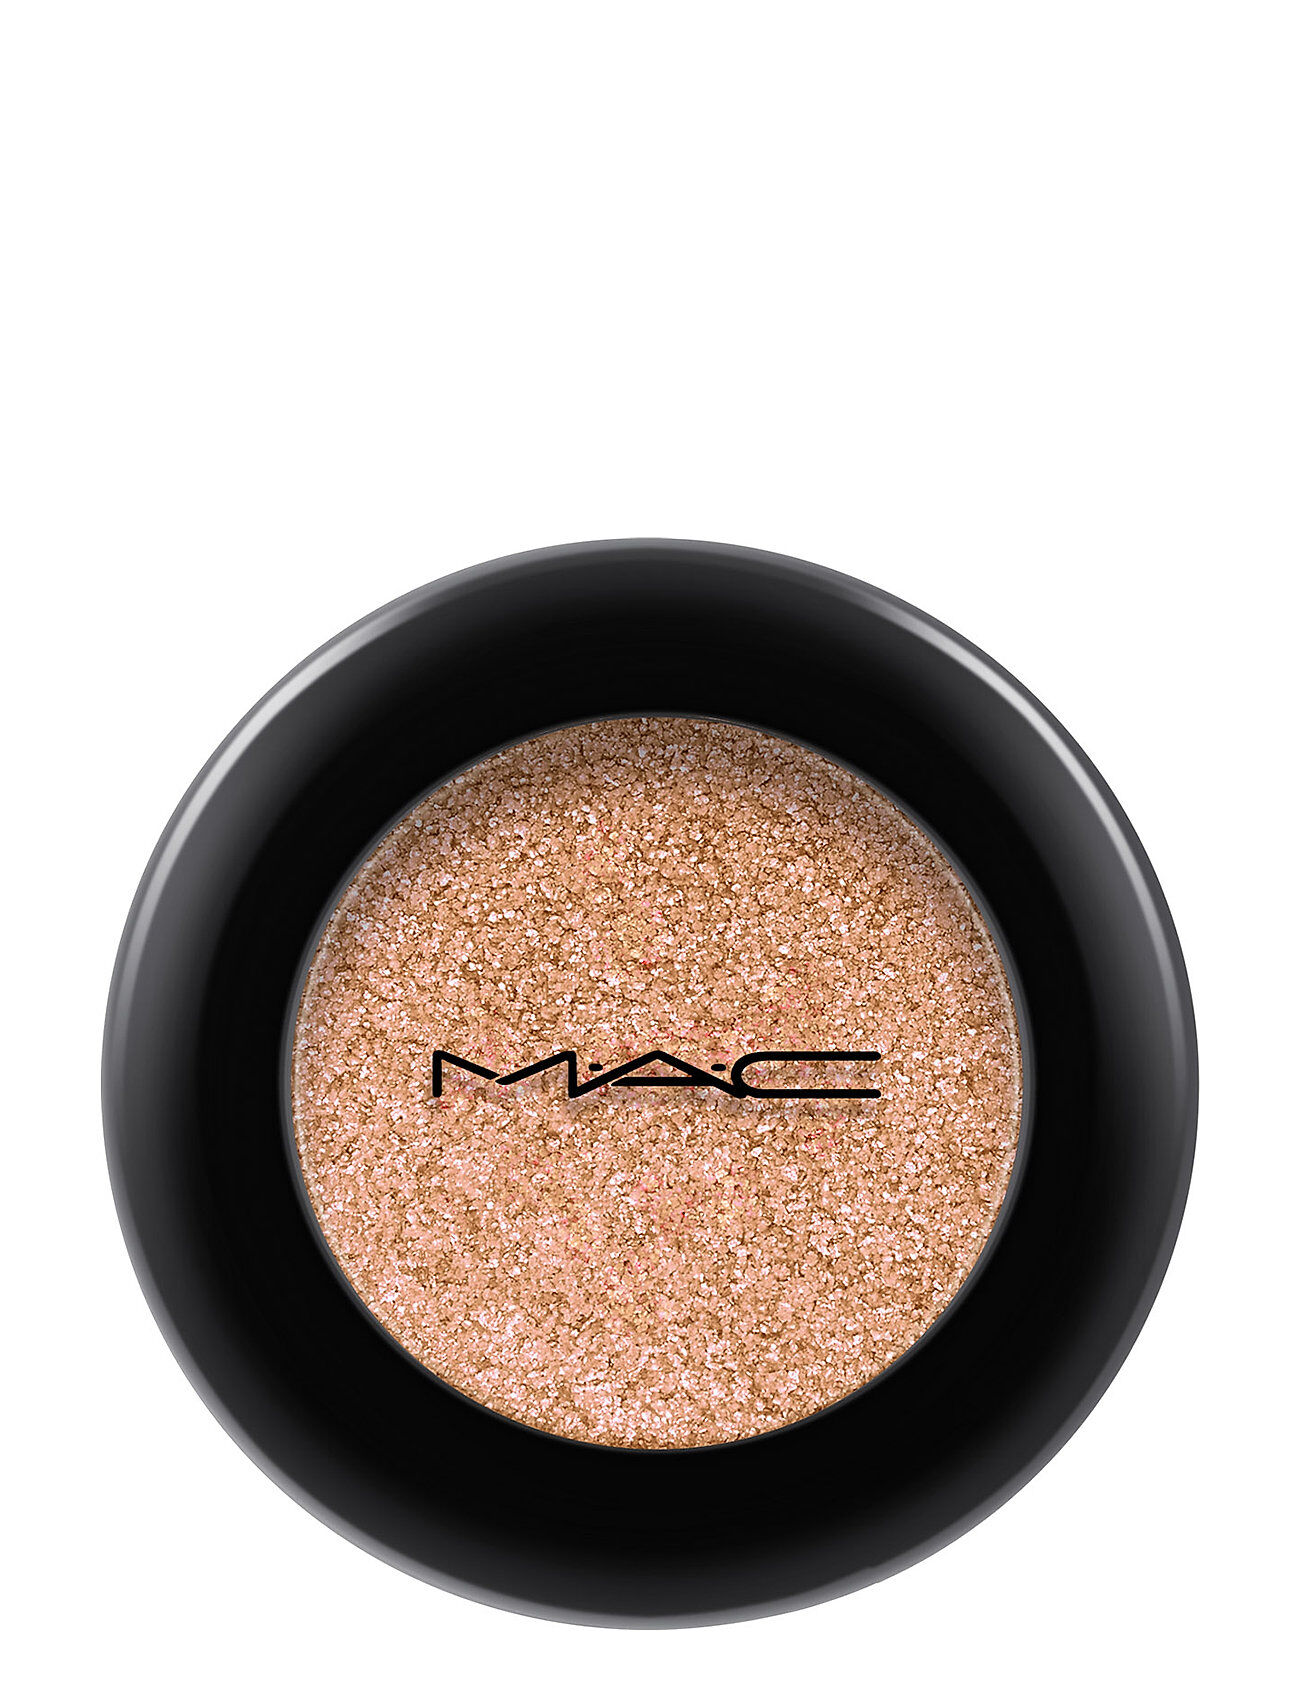 M.A.C. Dazzleshadow Extreme Beauty WOMEN Makeup Eyes Eyeshadow - Not Palettes Beige M.A.C.